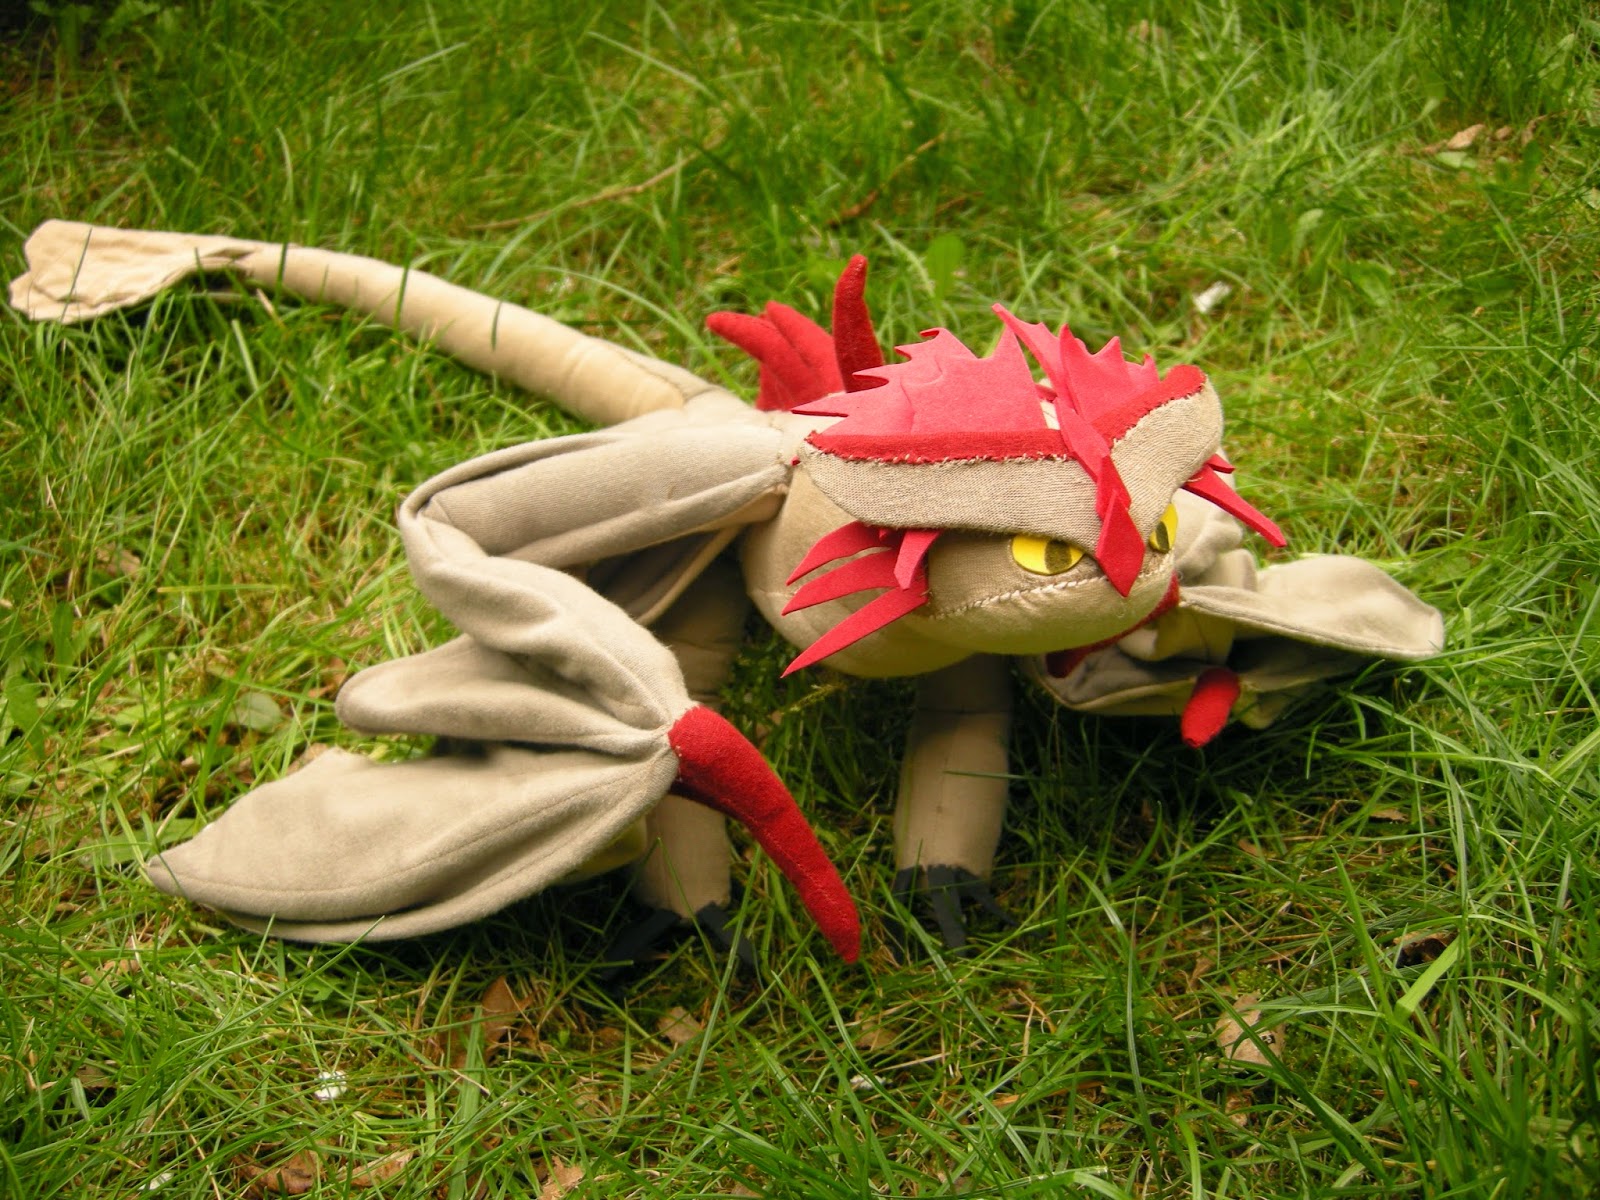 How to Sew Your Dragon - Fanciful Sewings